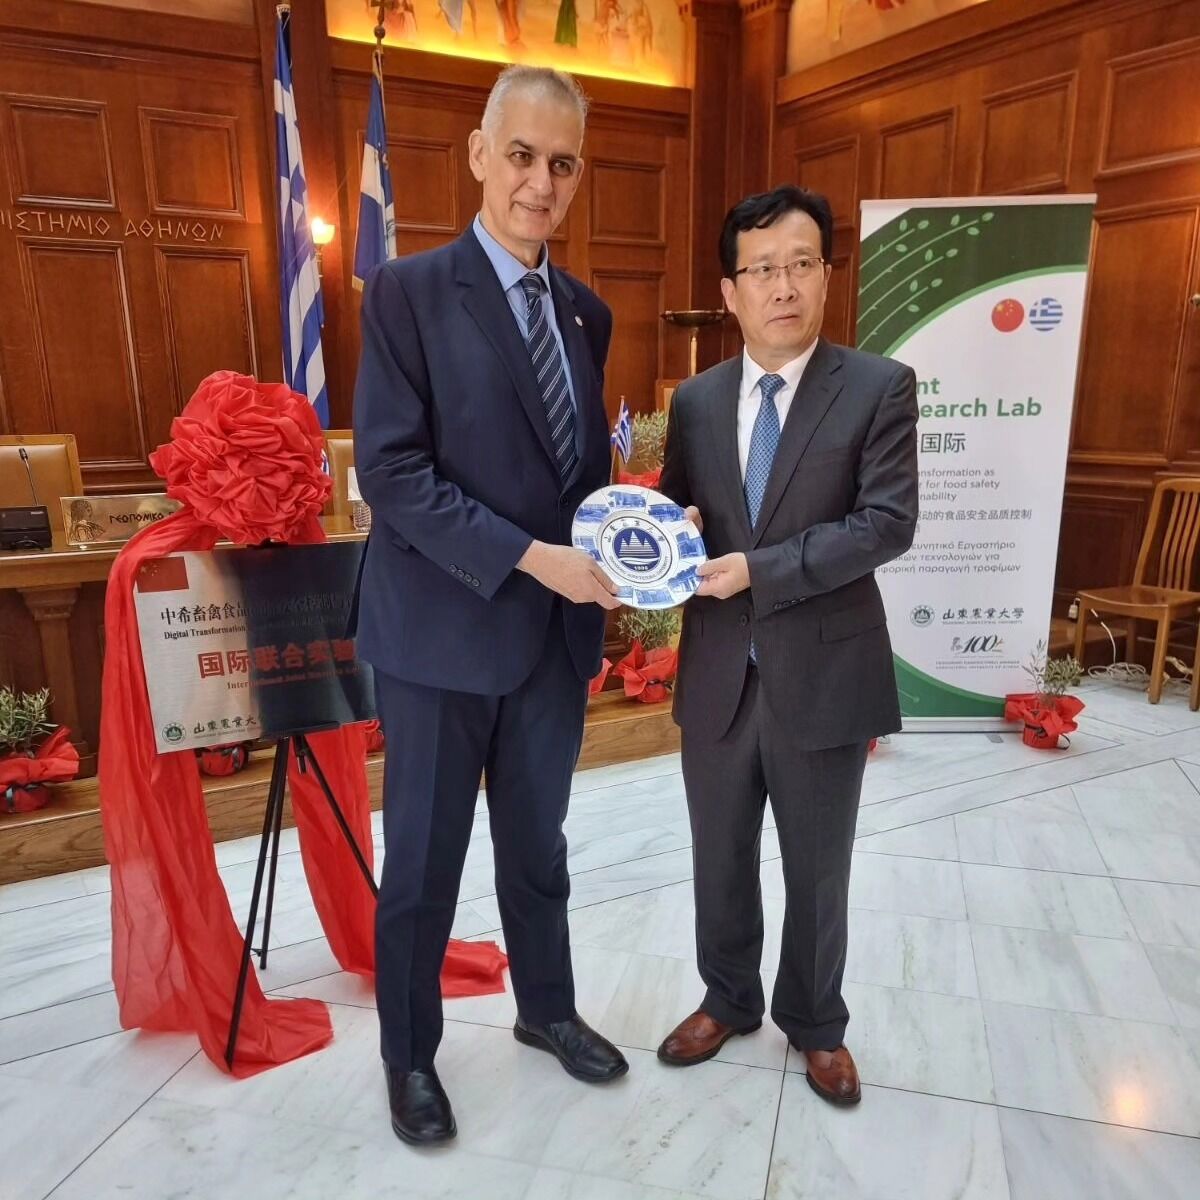 The first-ever joint research laboratory in digital agriculture between Greece and China at the European level